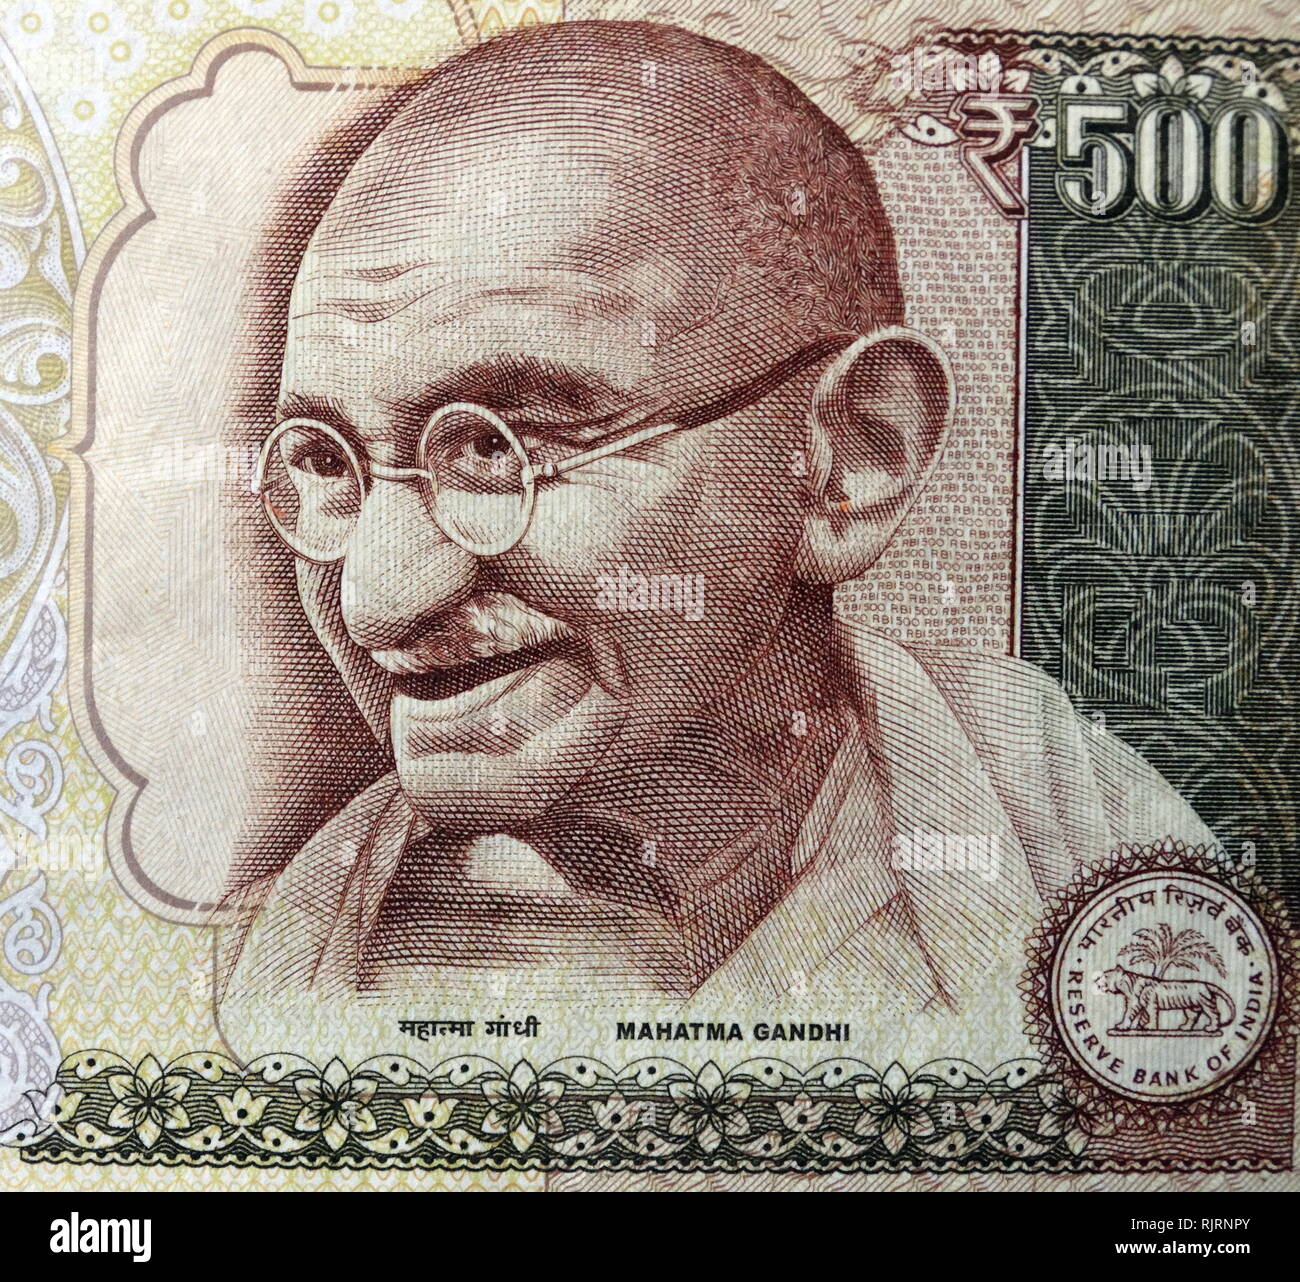 Gandhi depicted on the 500 Rupee banknote, used in India, between October 1997 and November 2016. Mohandas Karamchand Gandhi (1869 - 1948), was an Indian activist who was the leader of the Indian independence movement against British rule. Stock Photo